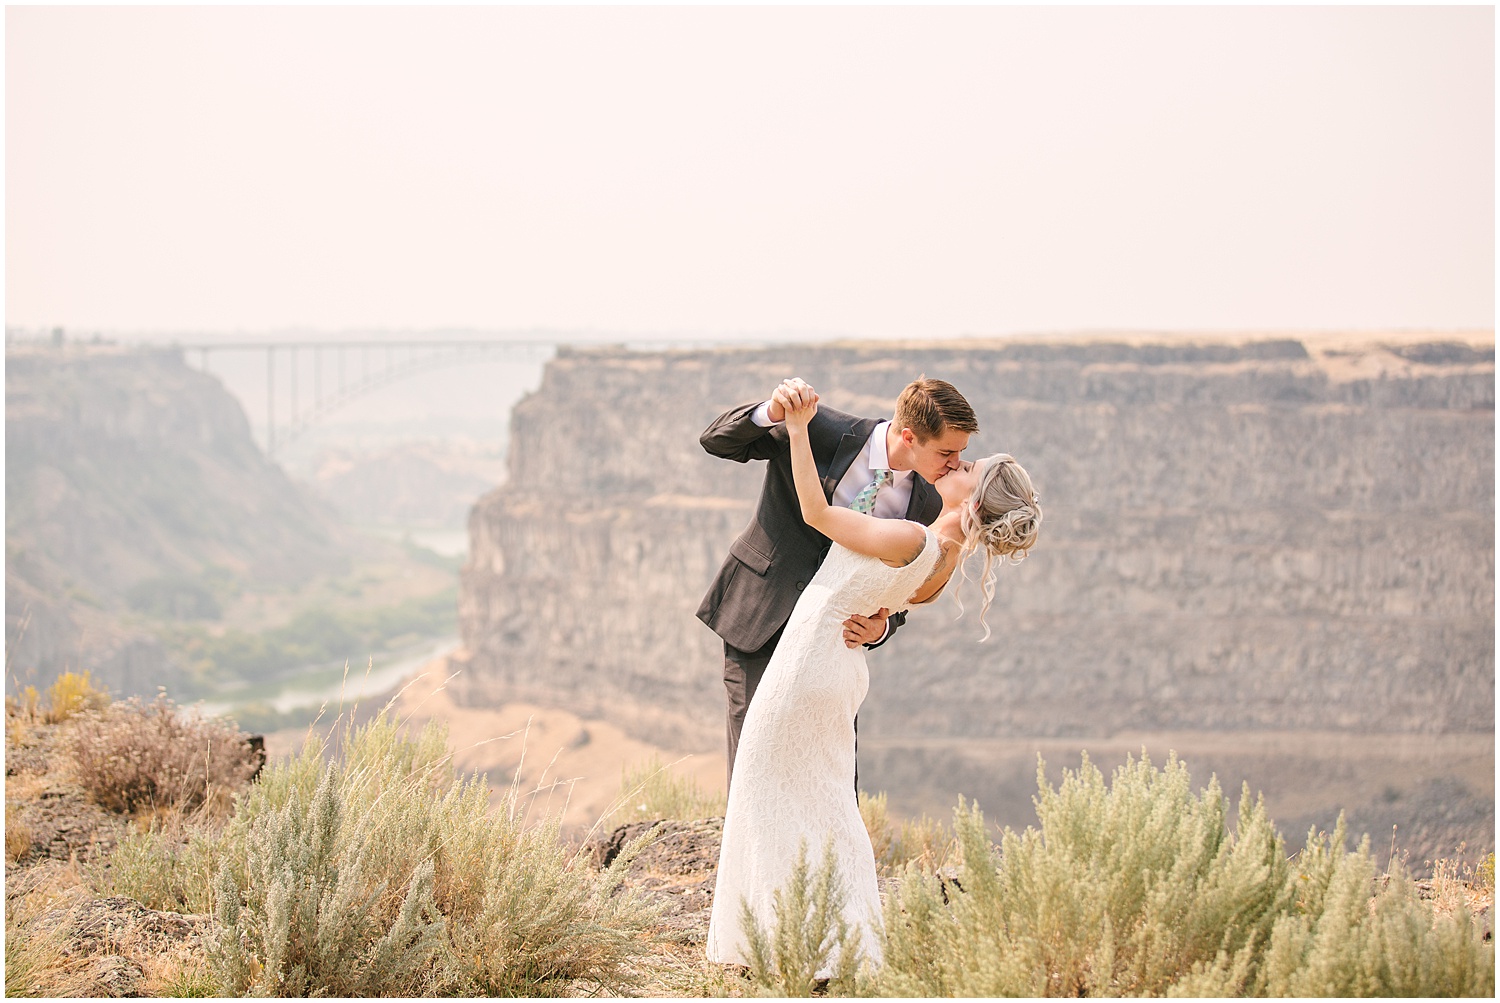 7 things to consider when searching for your wedding photographer - Denver wedding photographer